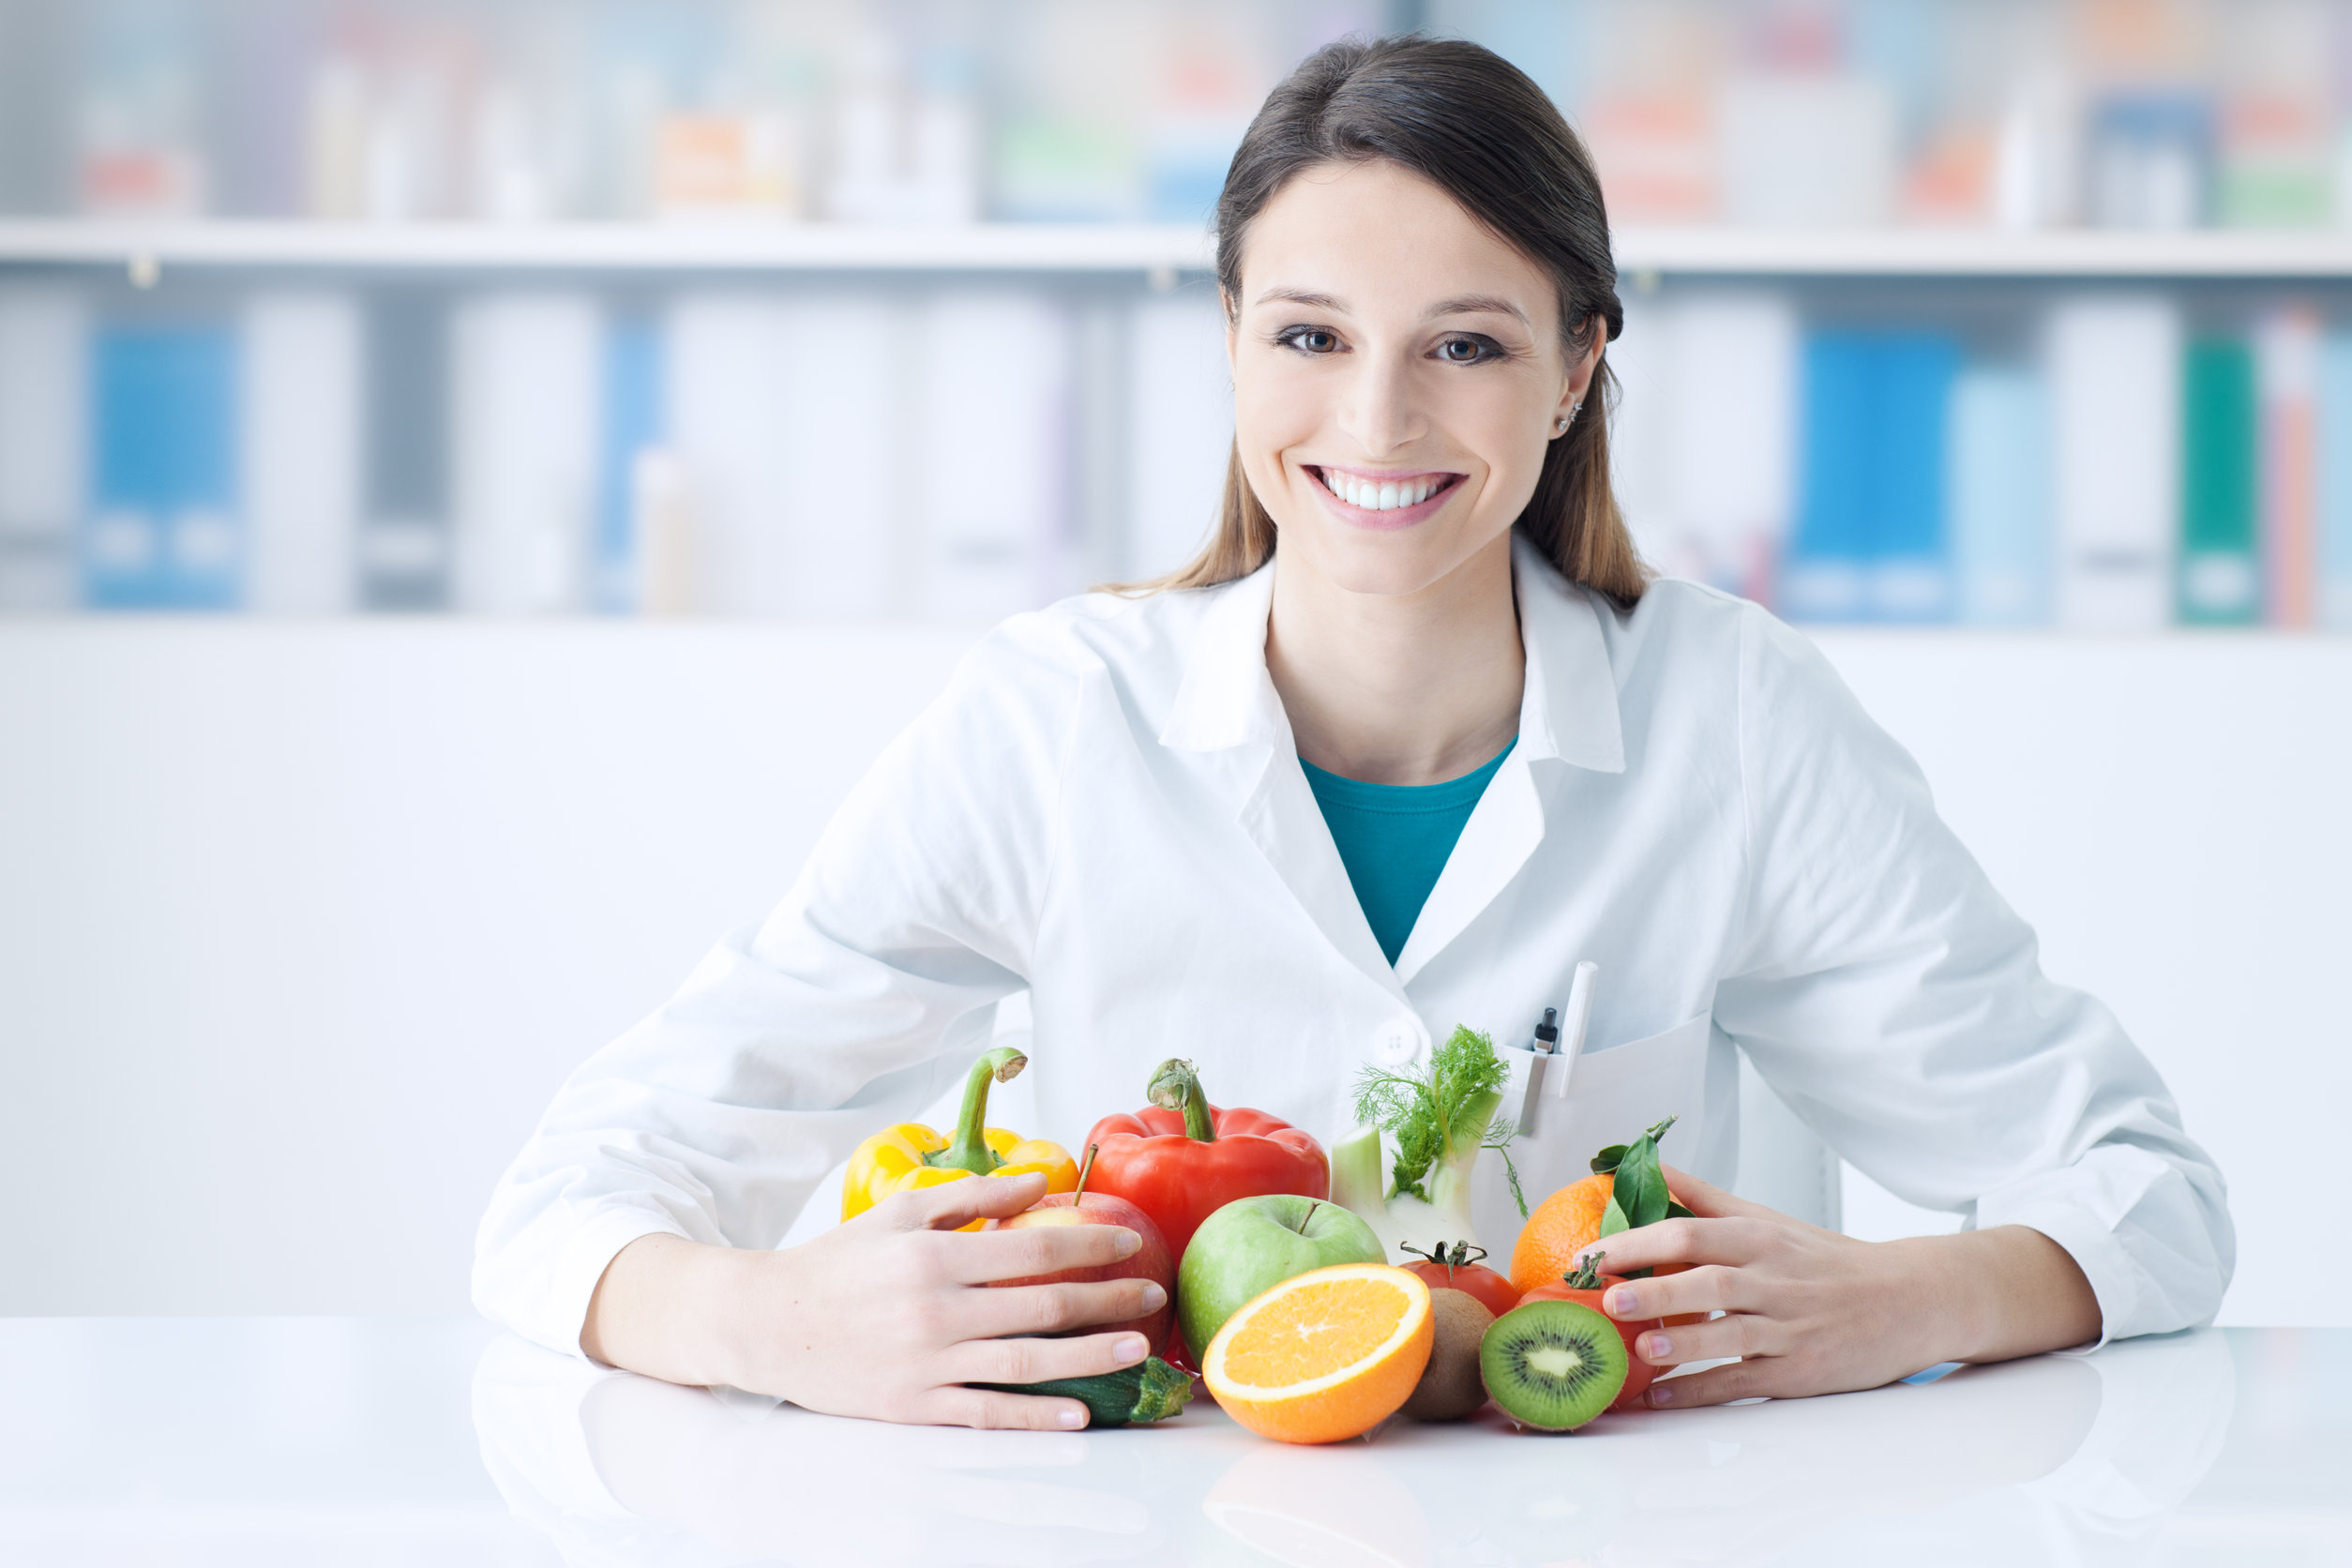 Nutritionist with Vegetables